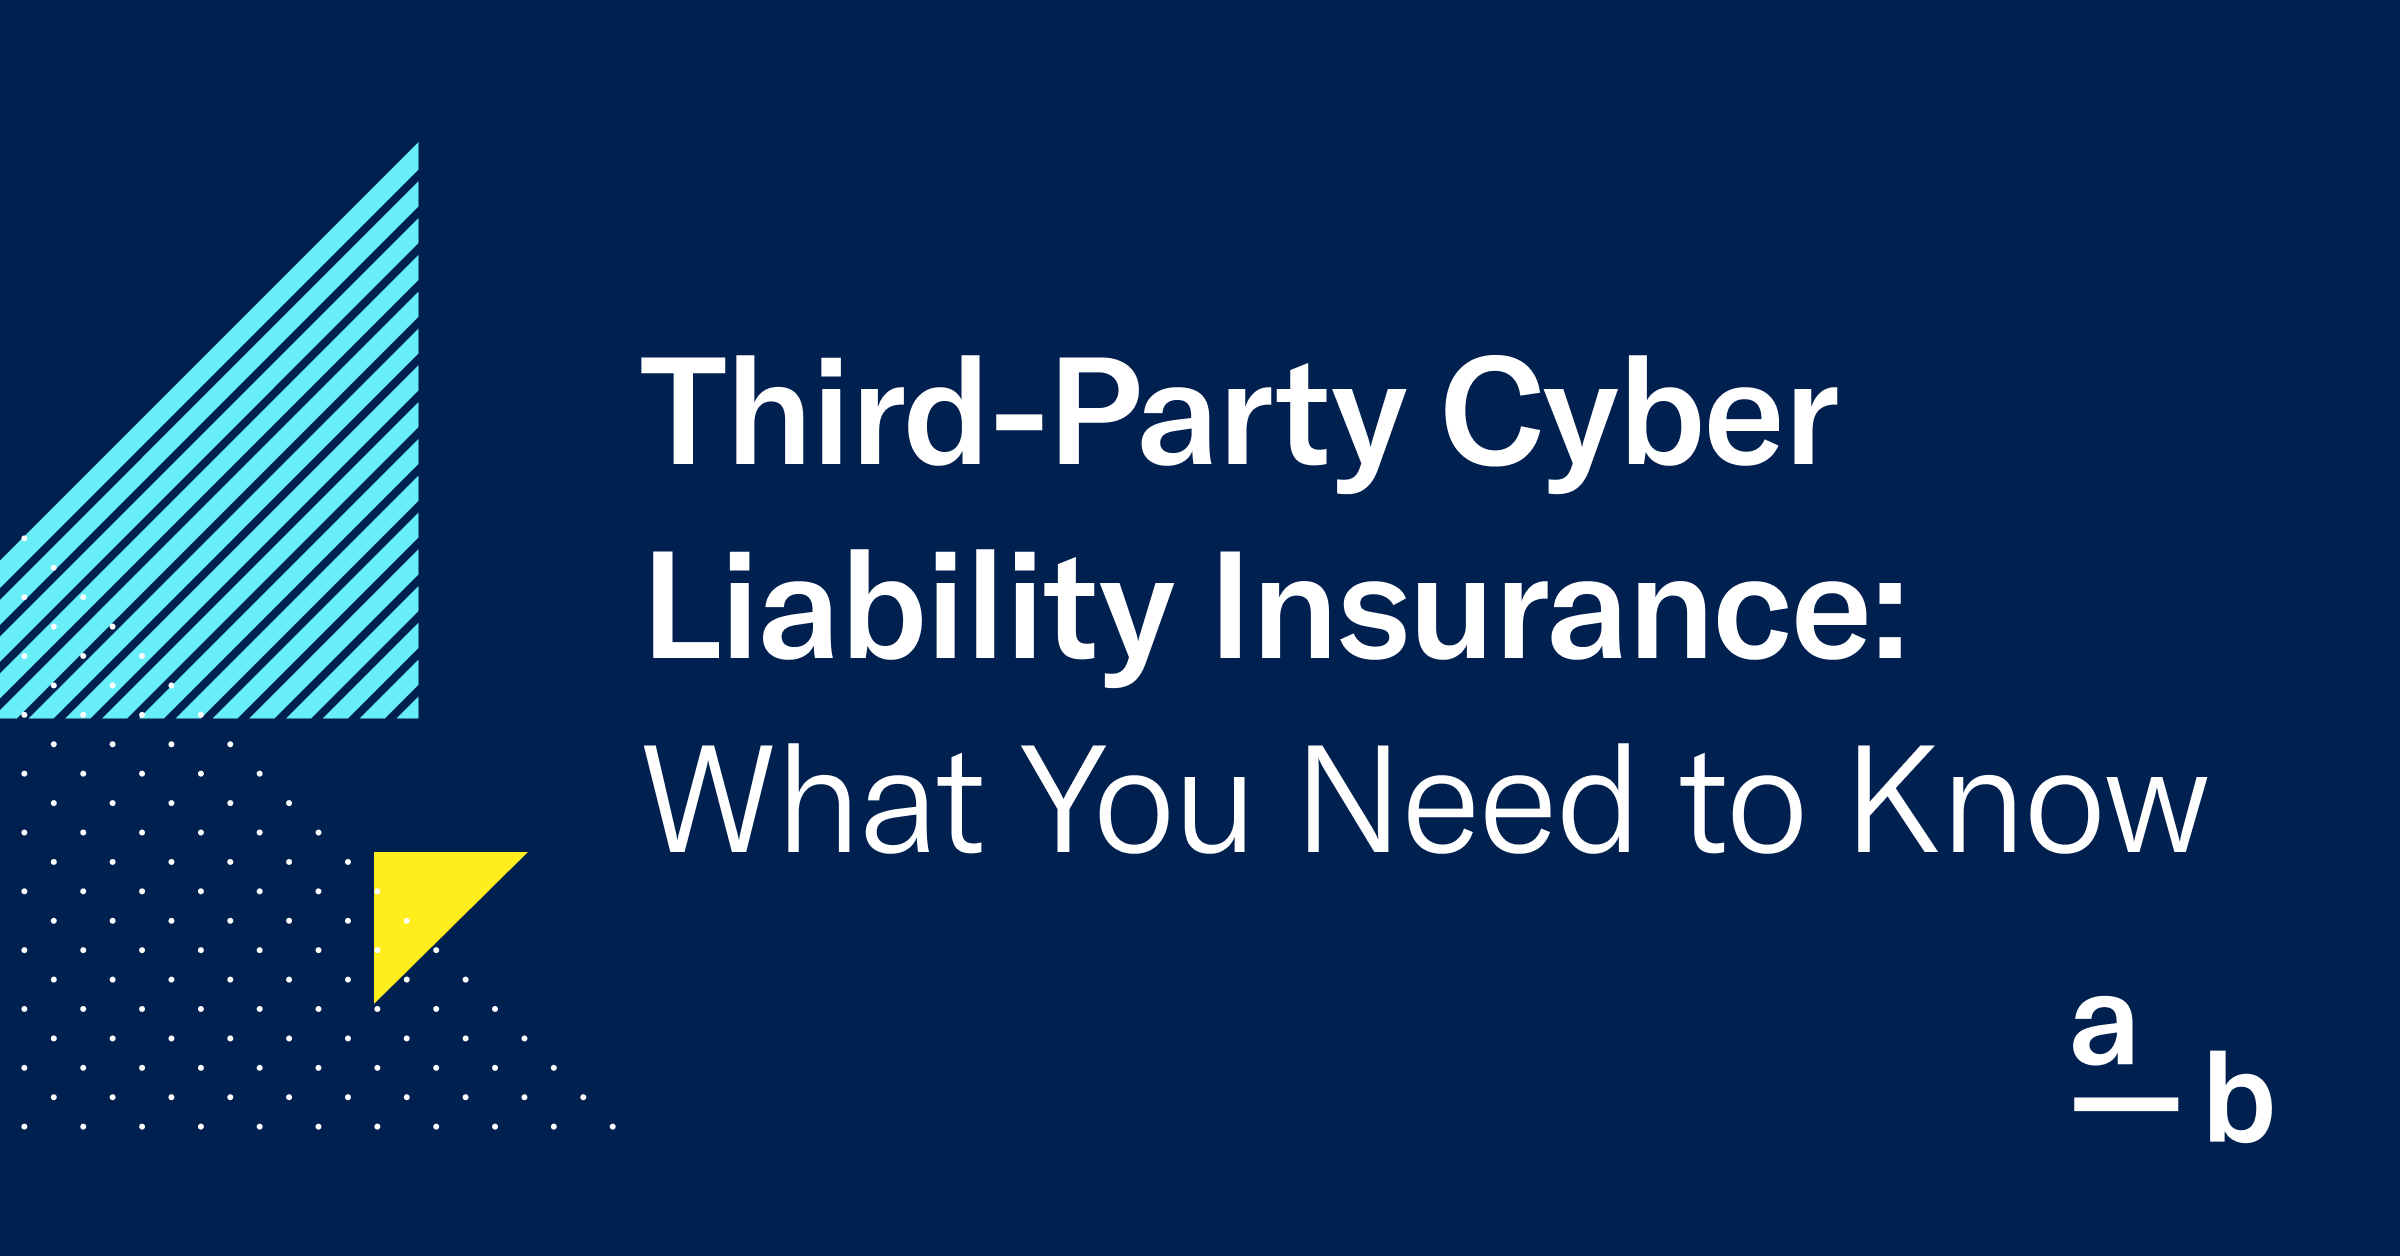 Third-Party Cyber Liability Insurance: What You Need to Know